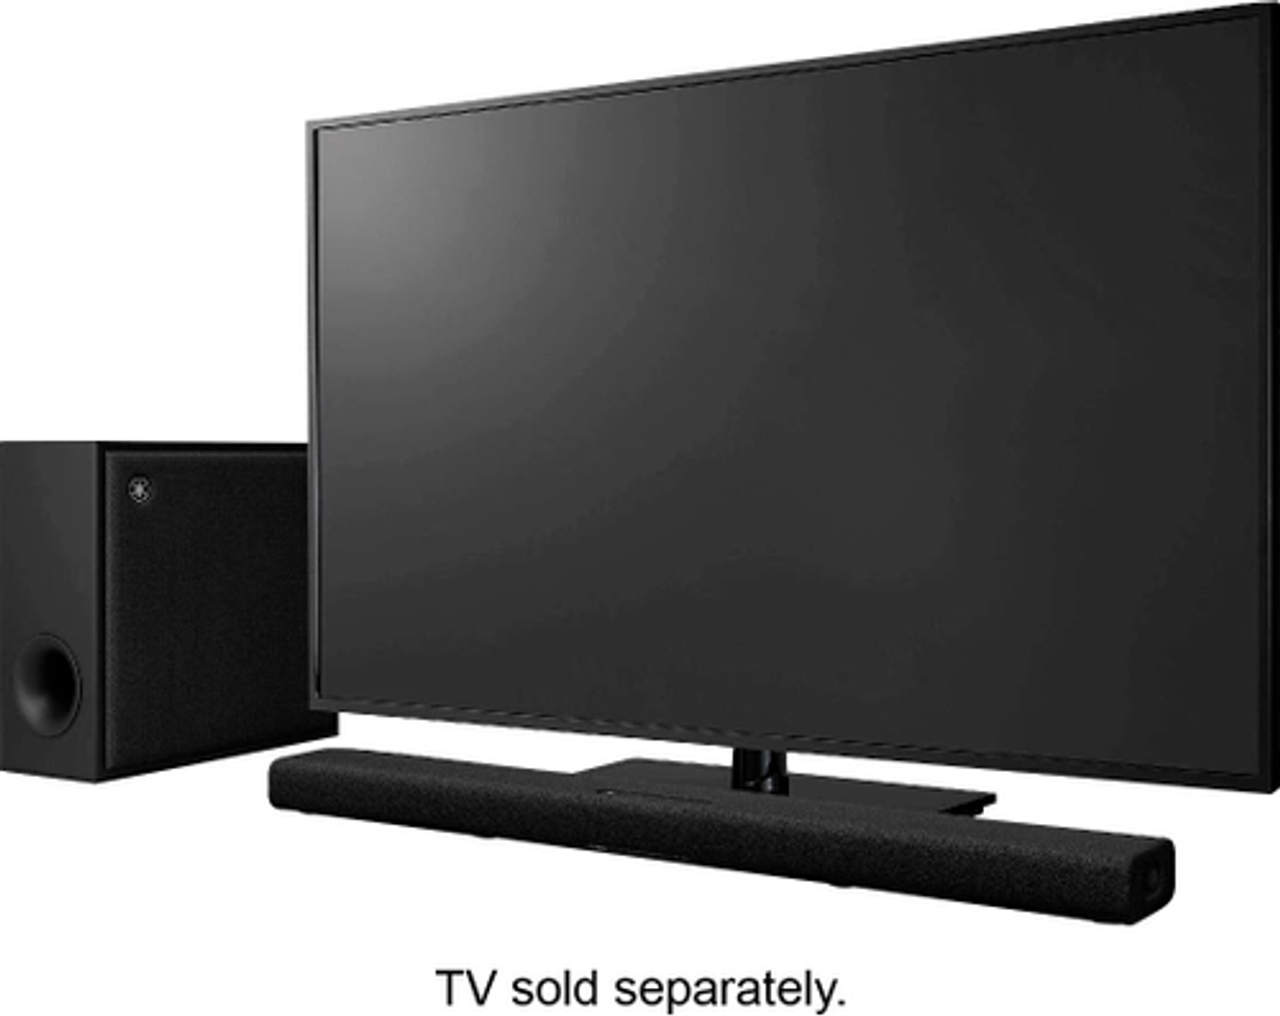 Yamaha - 4.1.2ch Sound Bar with Dolby Atmos, Wireless Subwoofer and Alexa Built-in - Black - Black